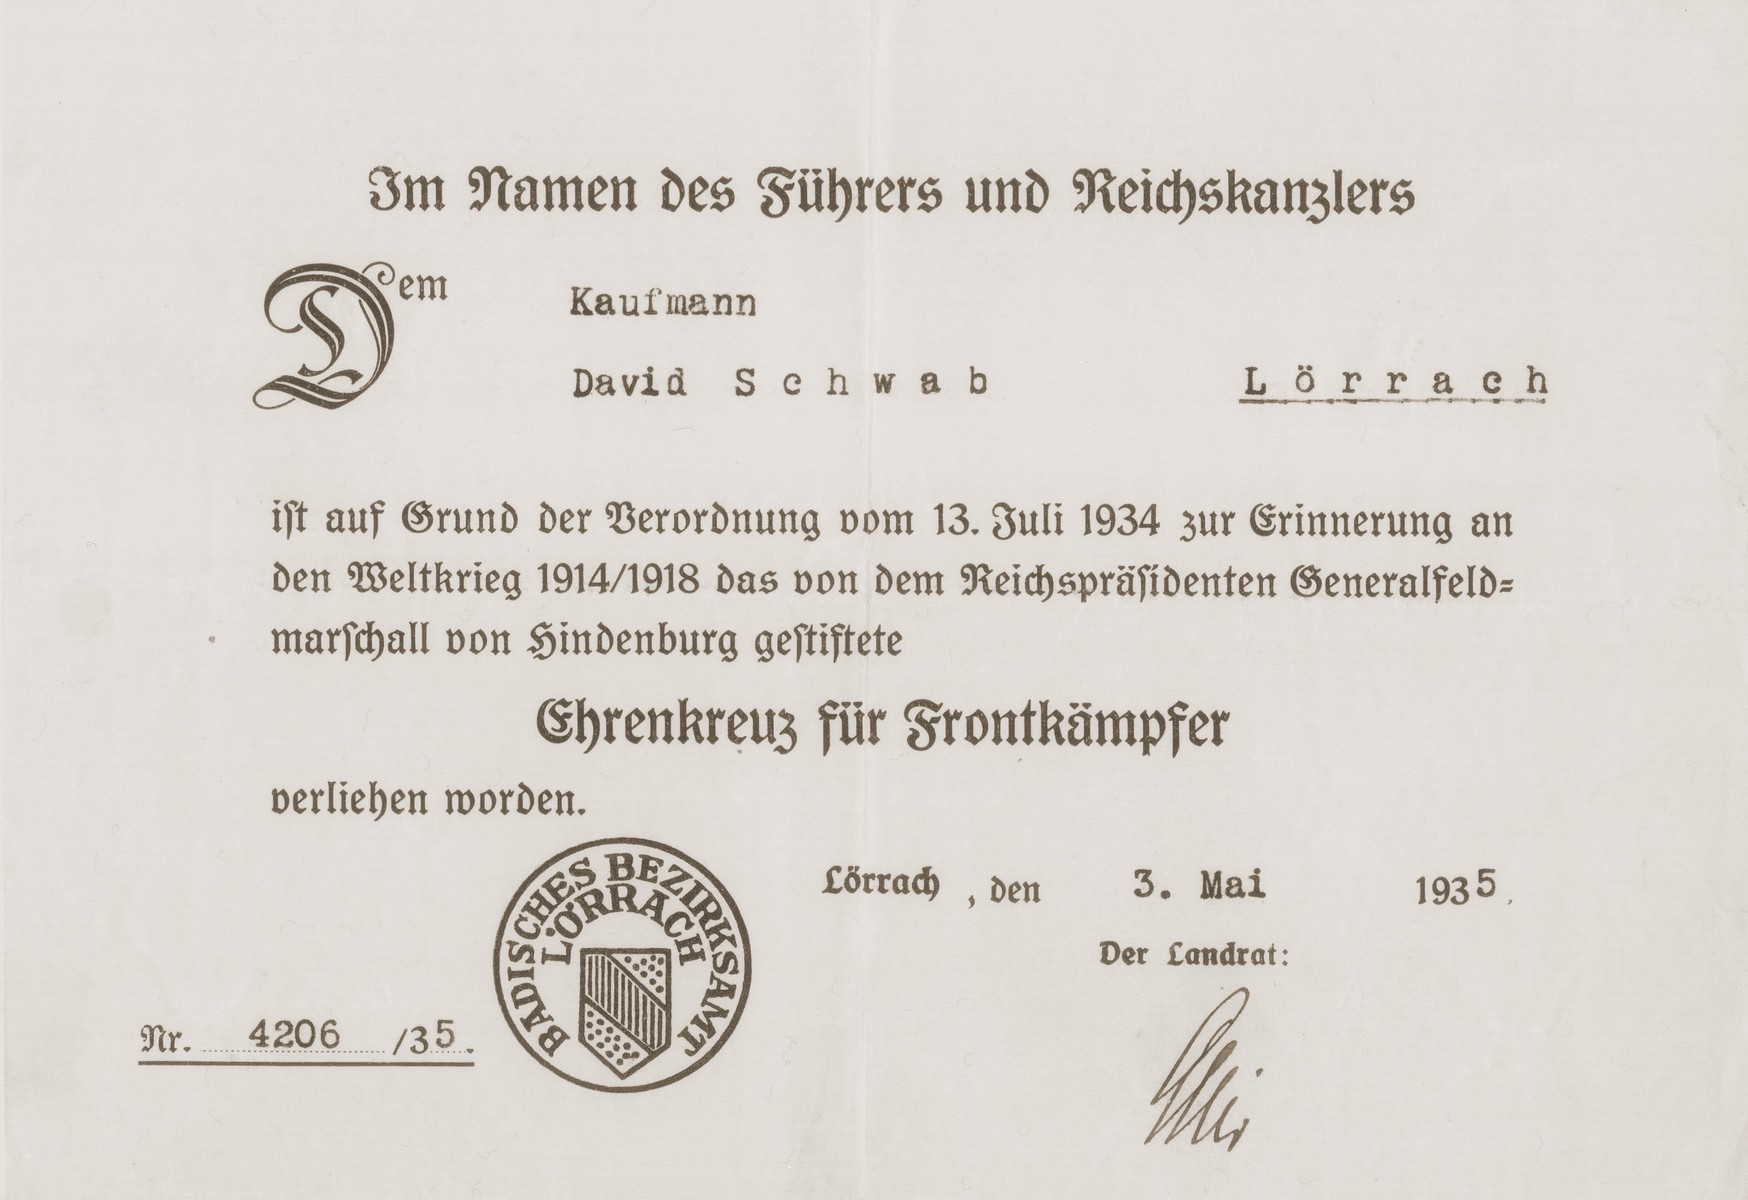 Certificate issued to the donor's father, David Schwab, by the Lorrach district office, for having earned a medal for his military service on the front lines during the [First] World War.  The certificate is issued "In the Name of the Leader and Chancellor."